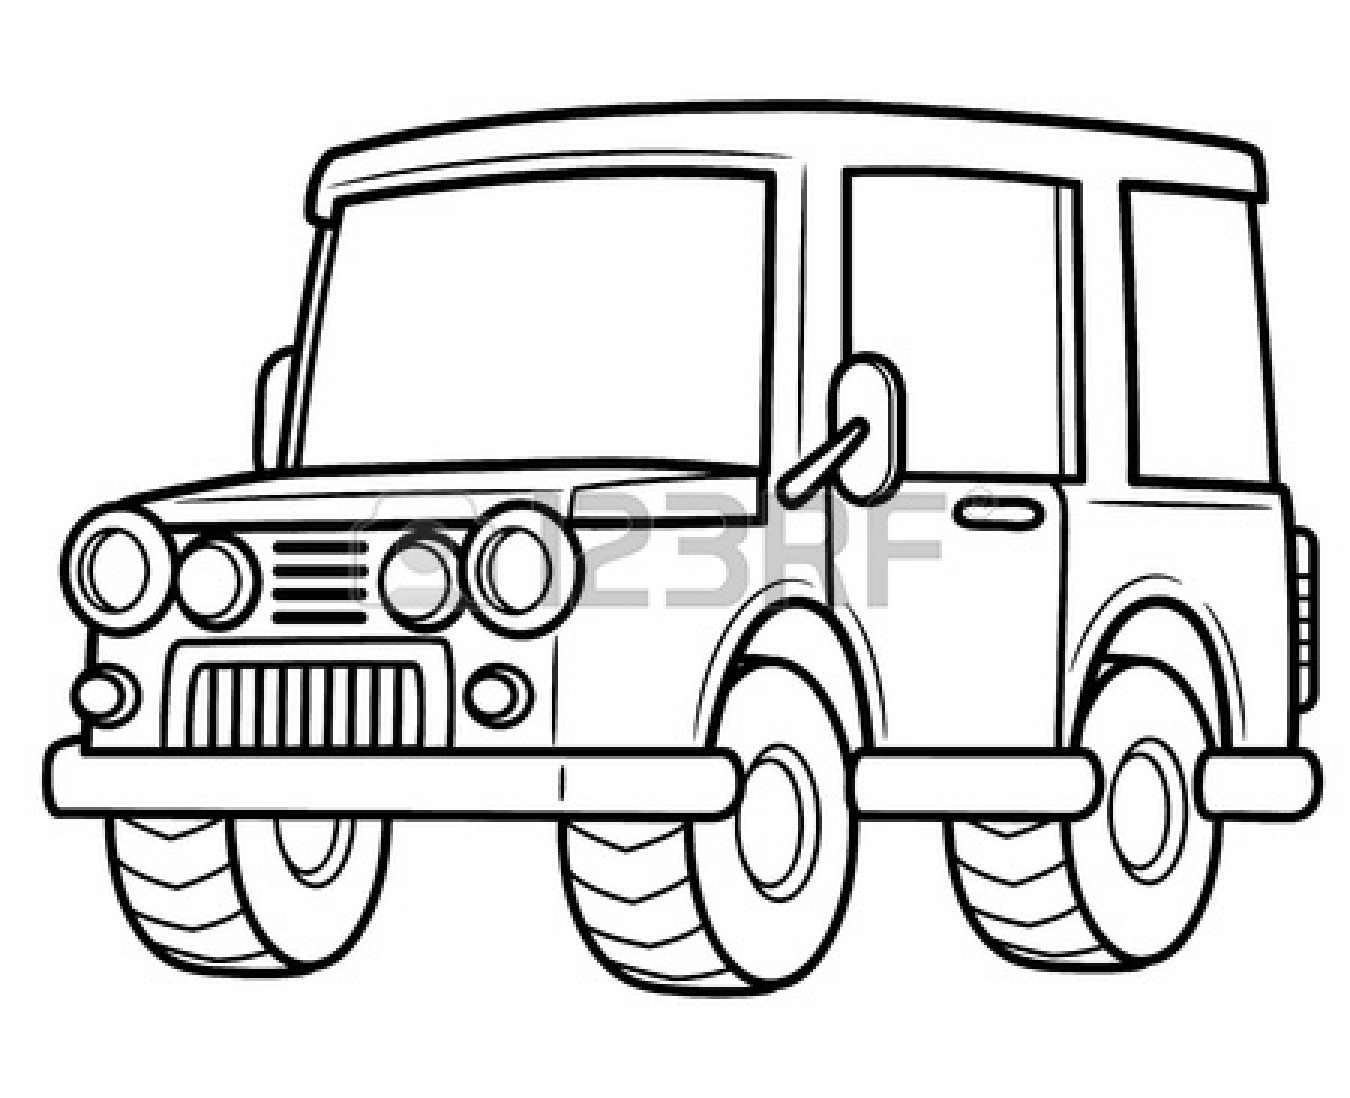 Monster Truck Clipart Black And White   Clipart Panda   Free Clipart    